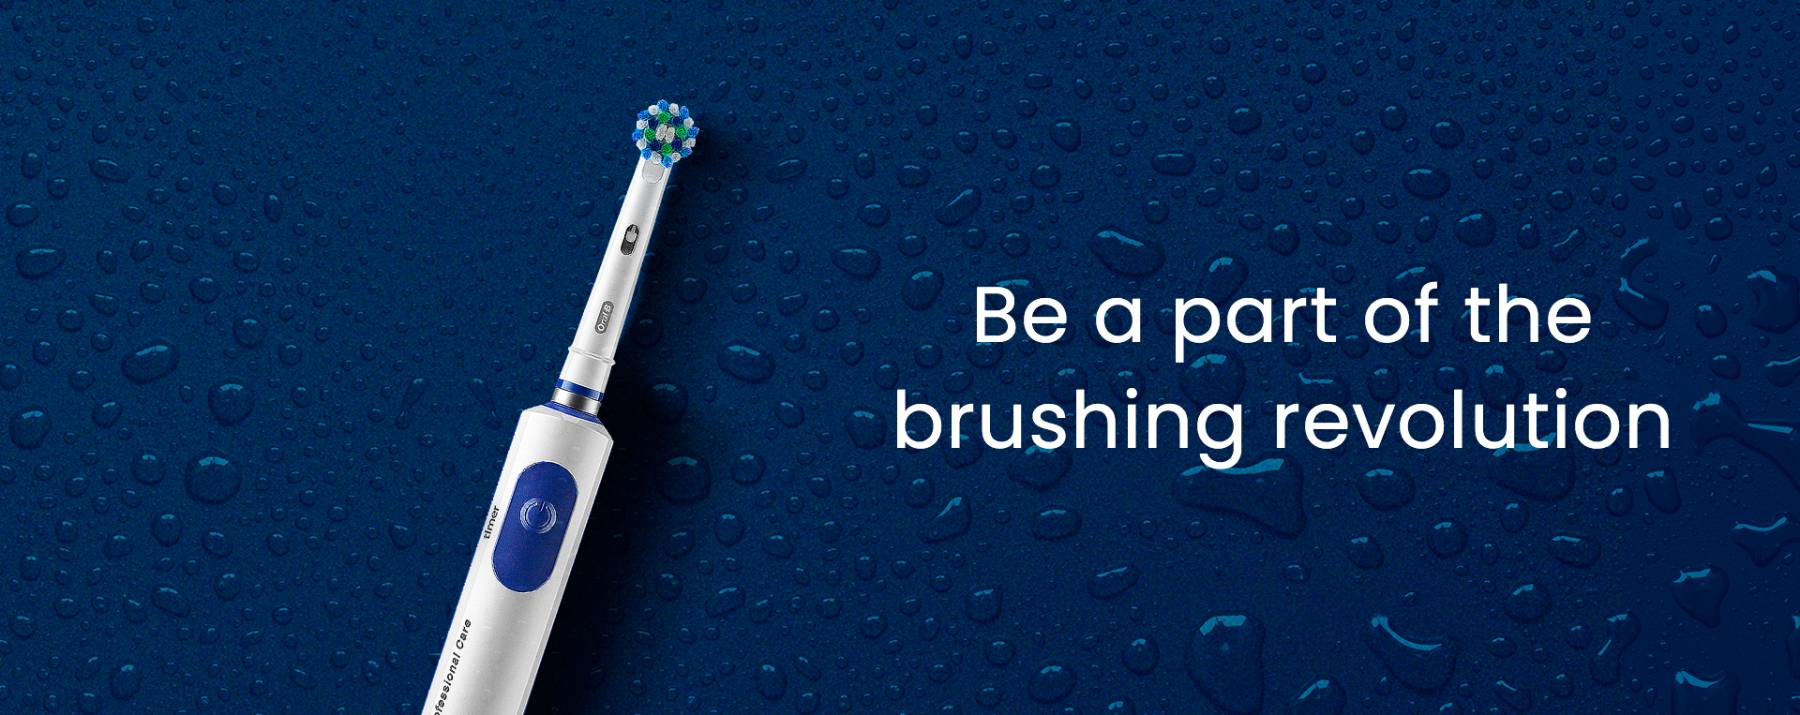 Oral-B Pro 600 Cross Action Electric Rechargeable Toothbrush Diwali Gift Pack